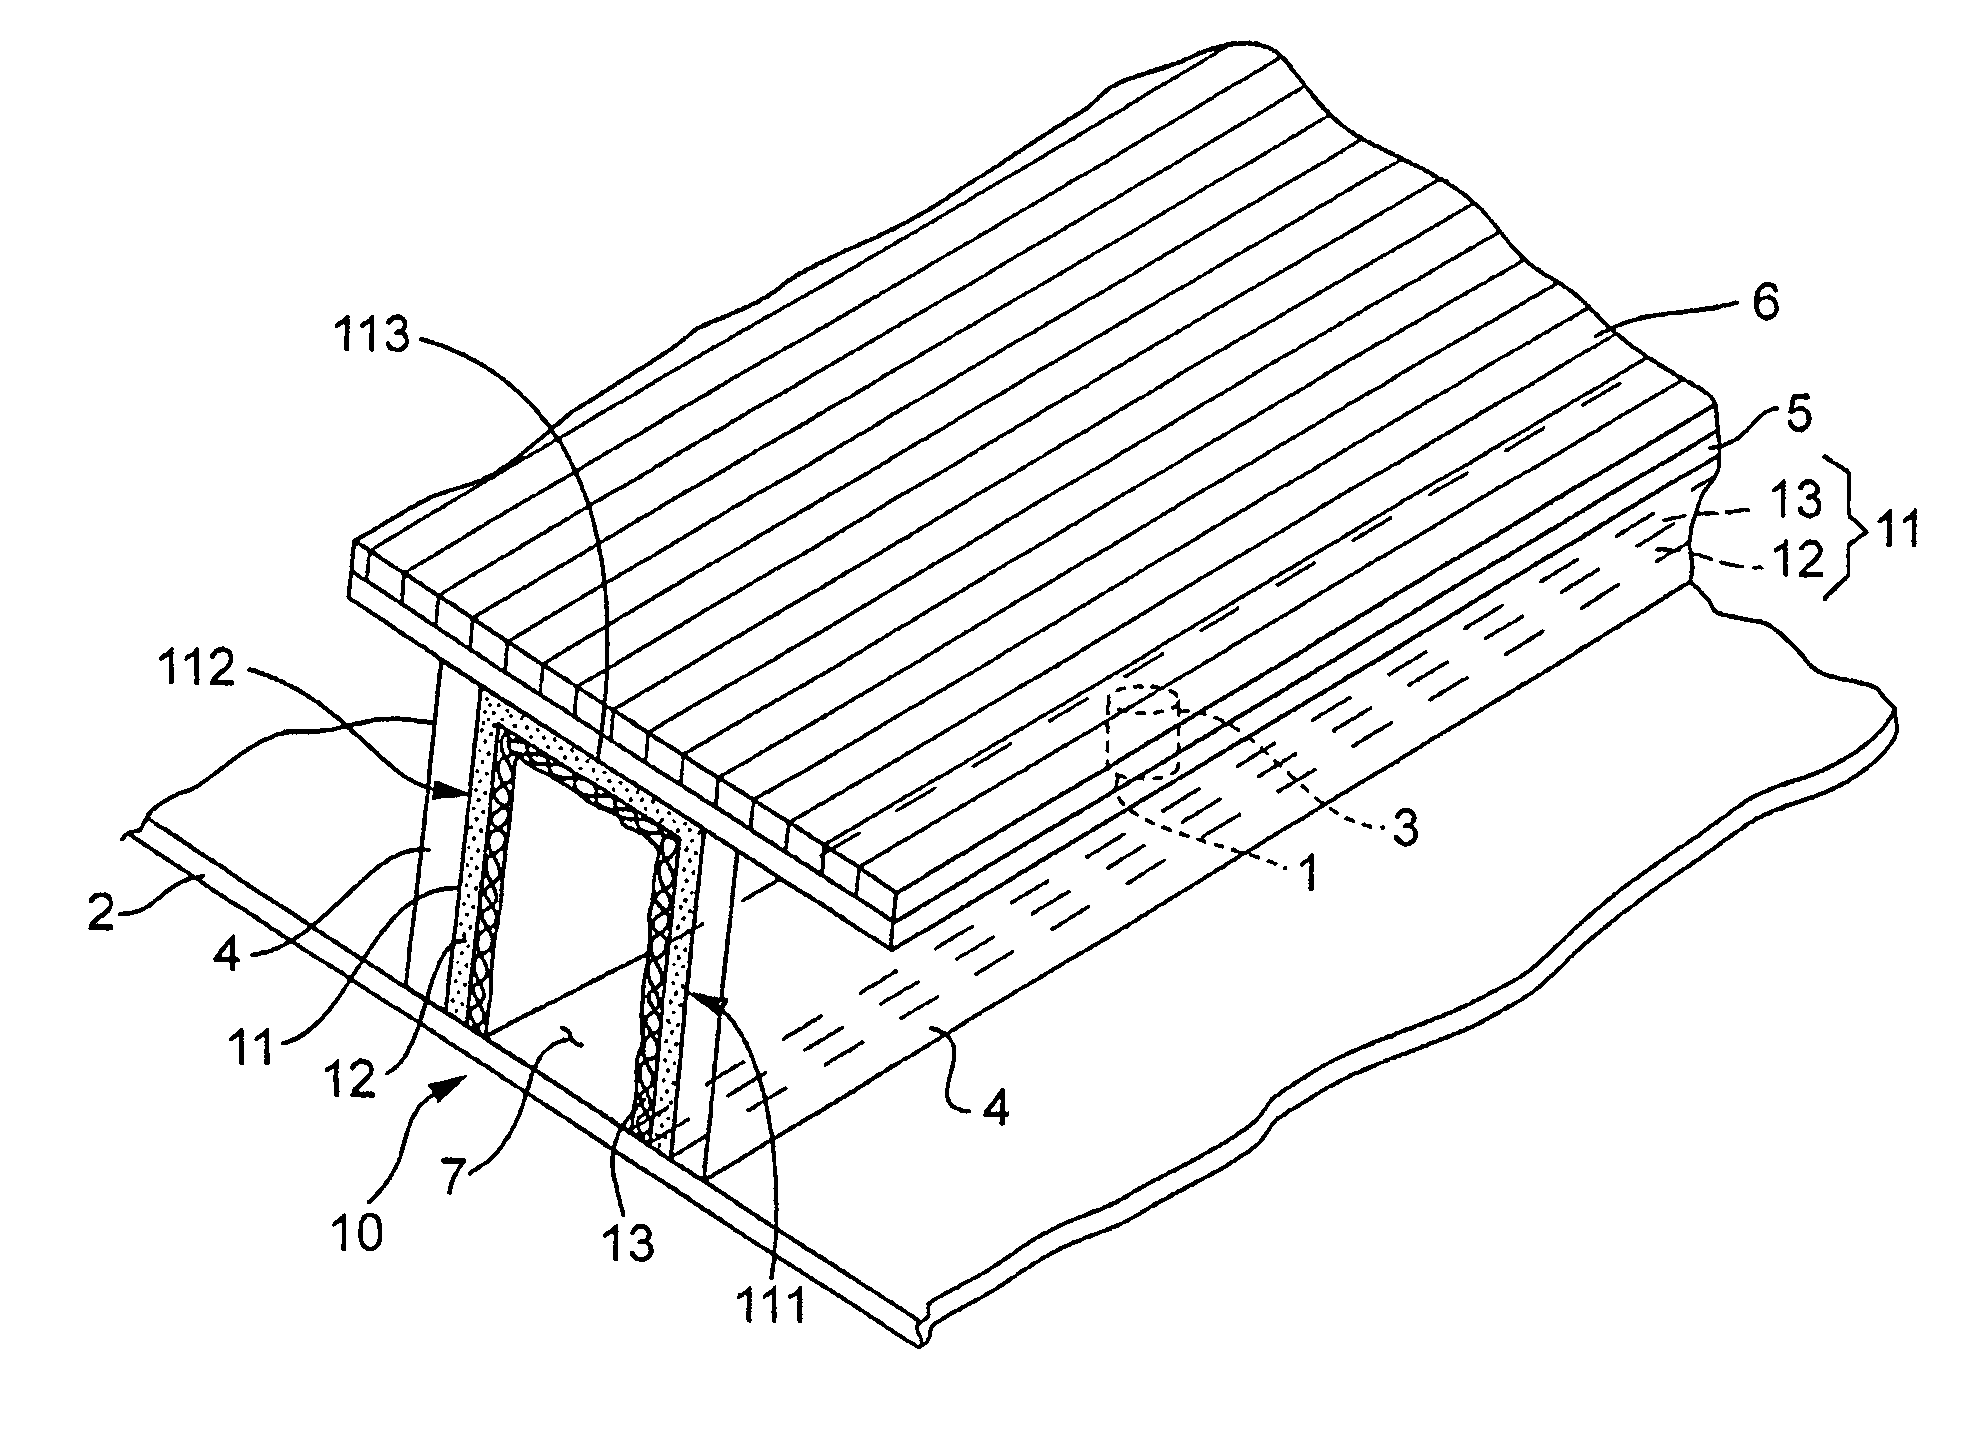 Perforation acoustic muffler assembly and method of reducing noise transmission through objects